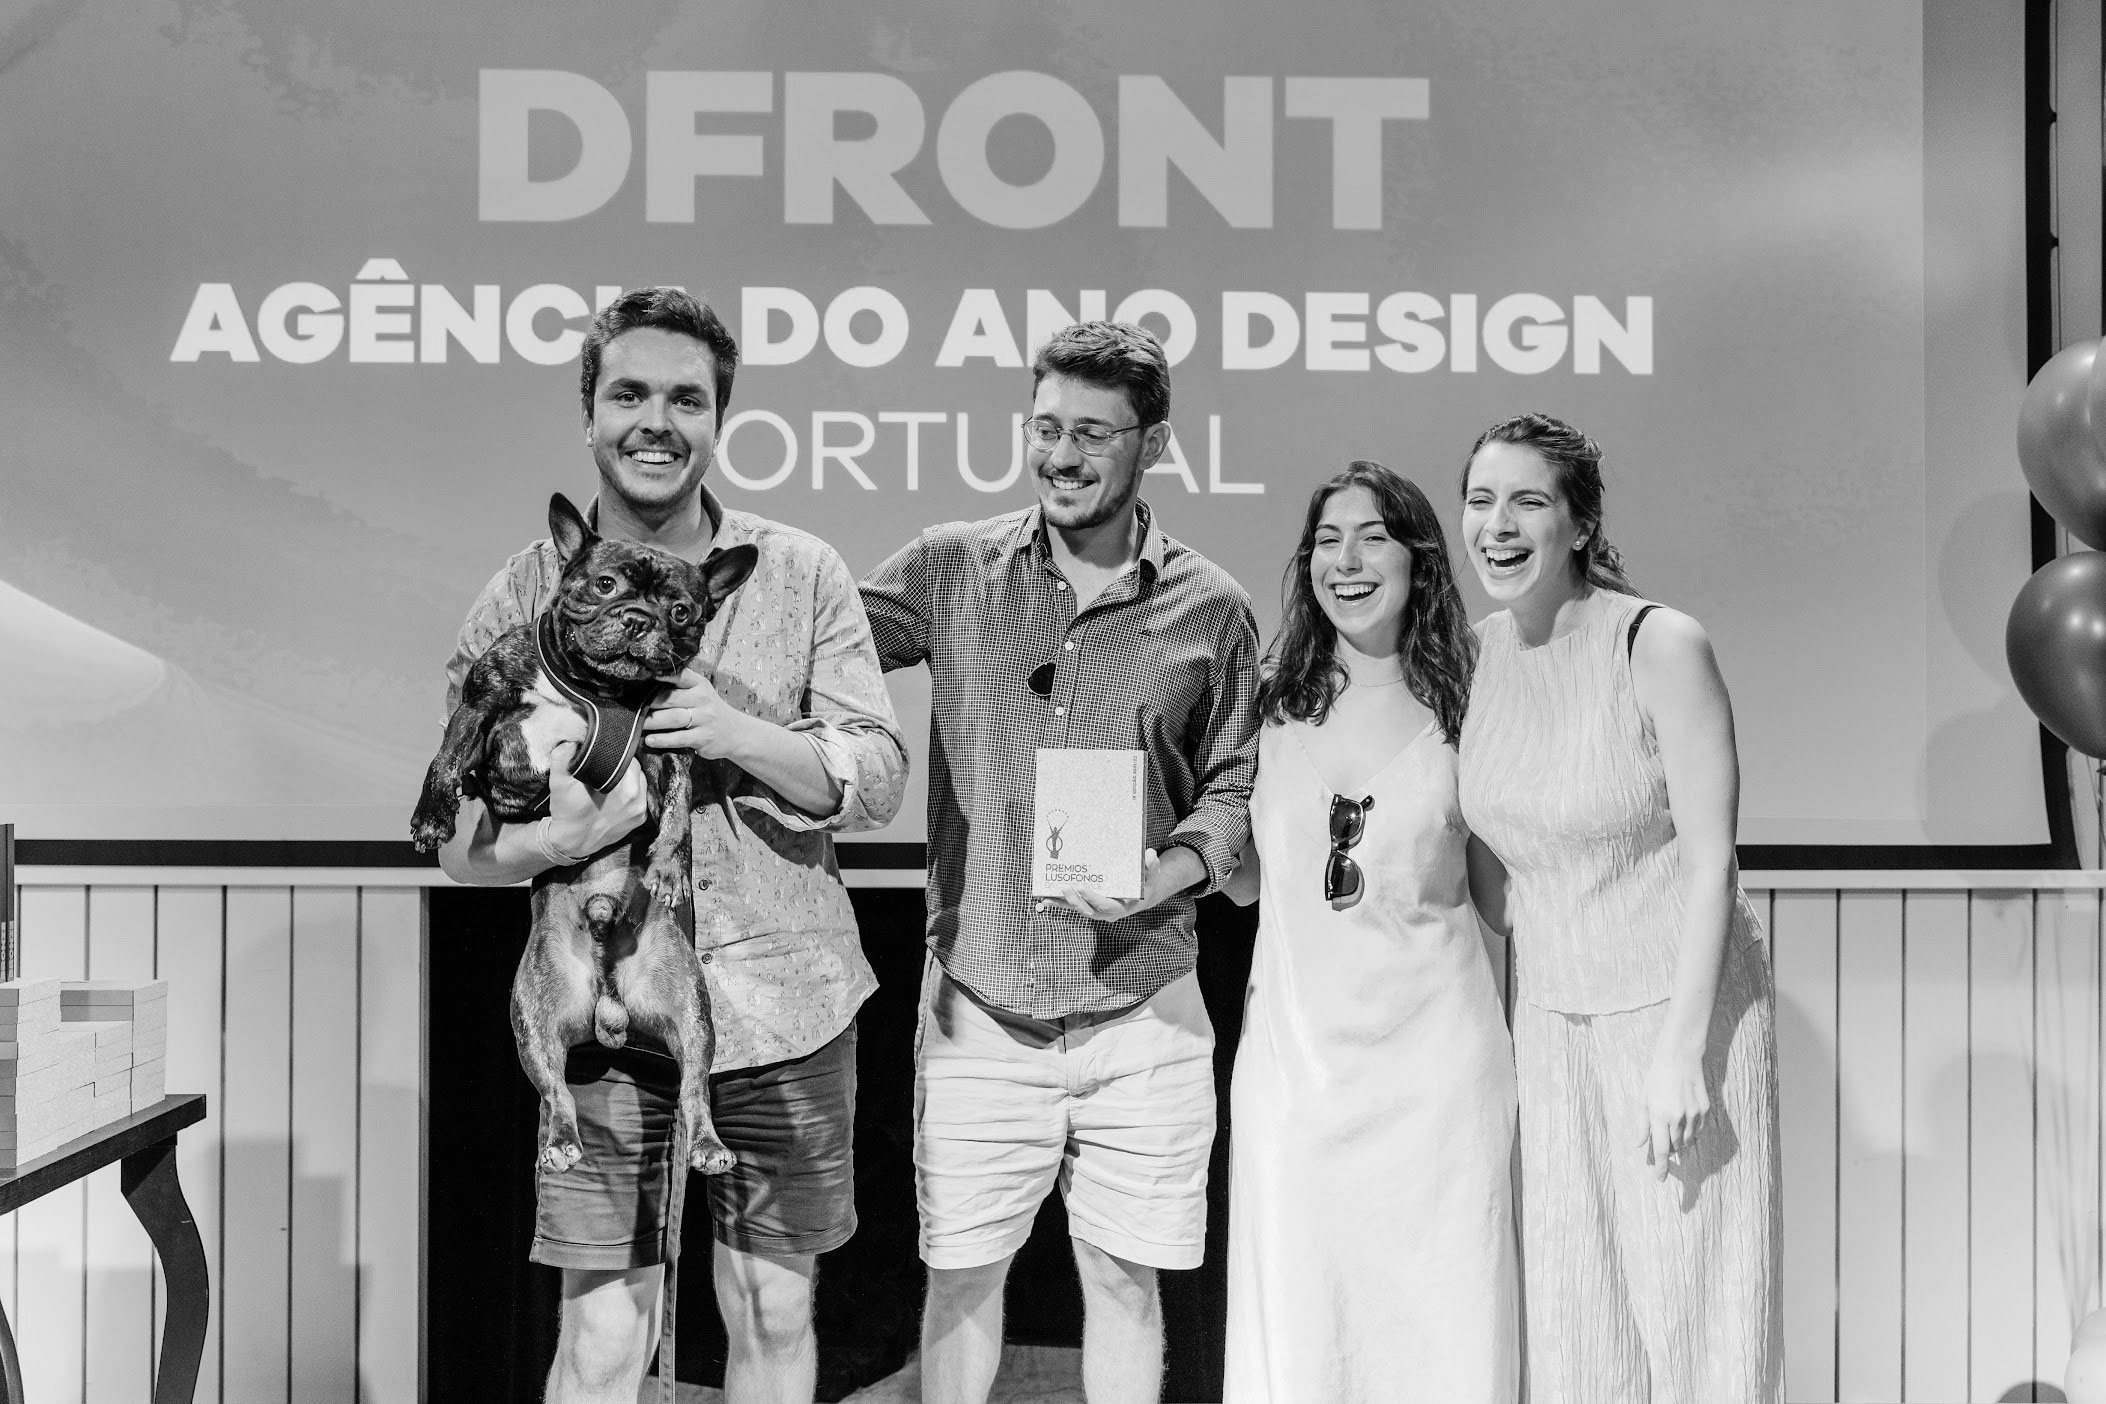 D’FRONT is Design Agency of the Year